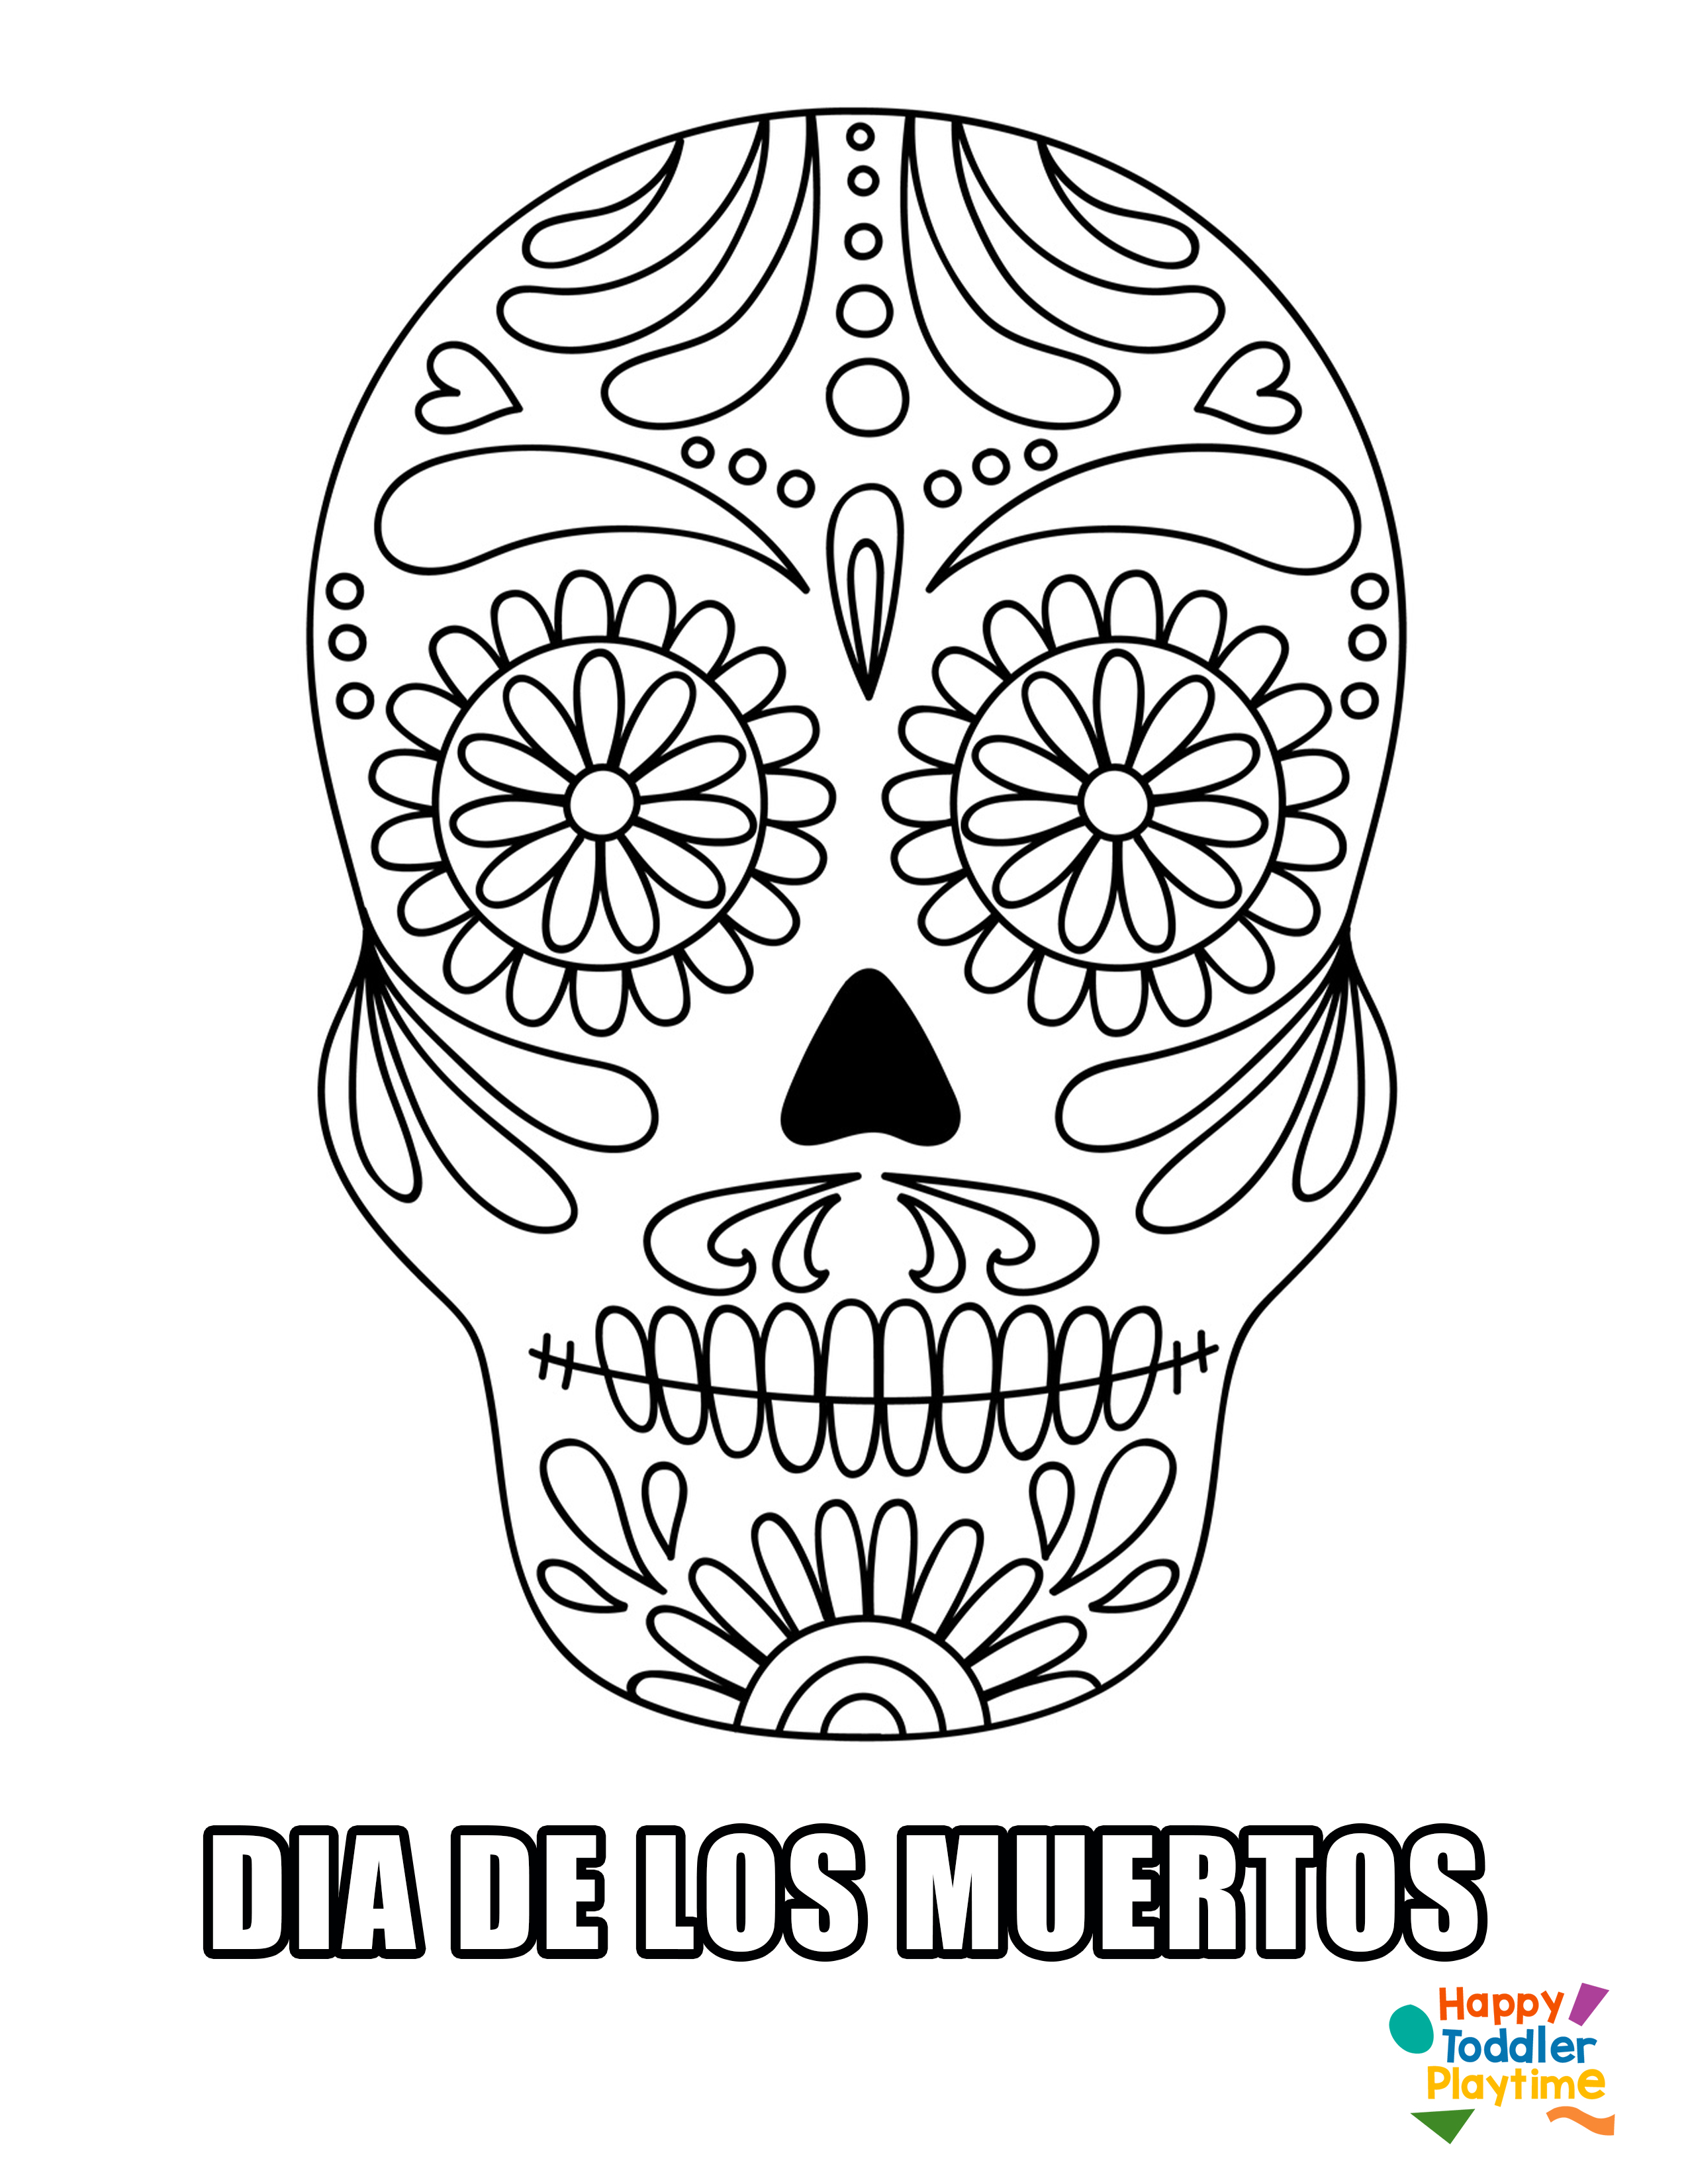 Free dia de los muertos day of the dead printable colouring pages for kids